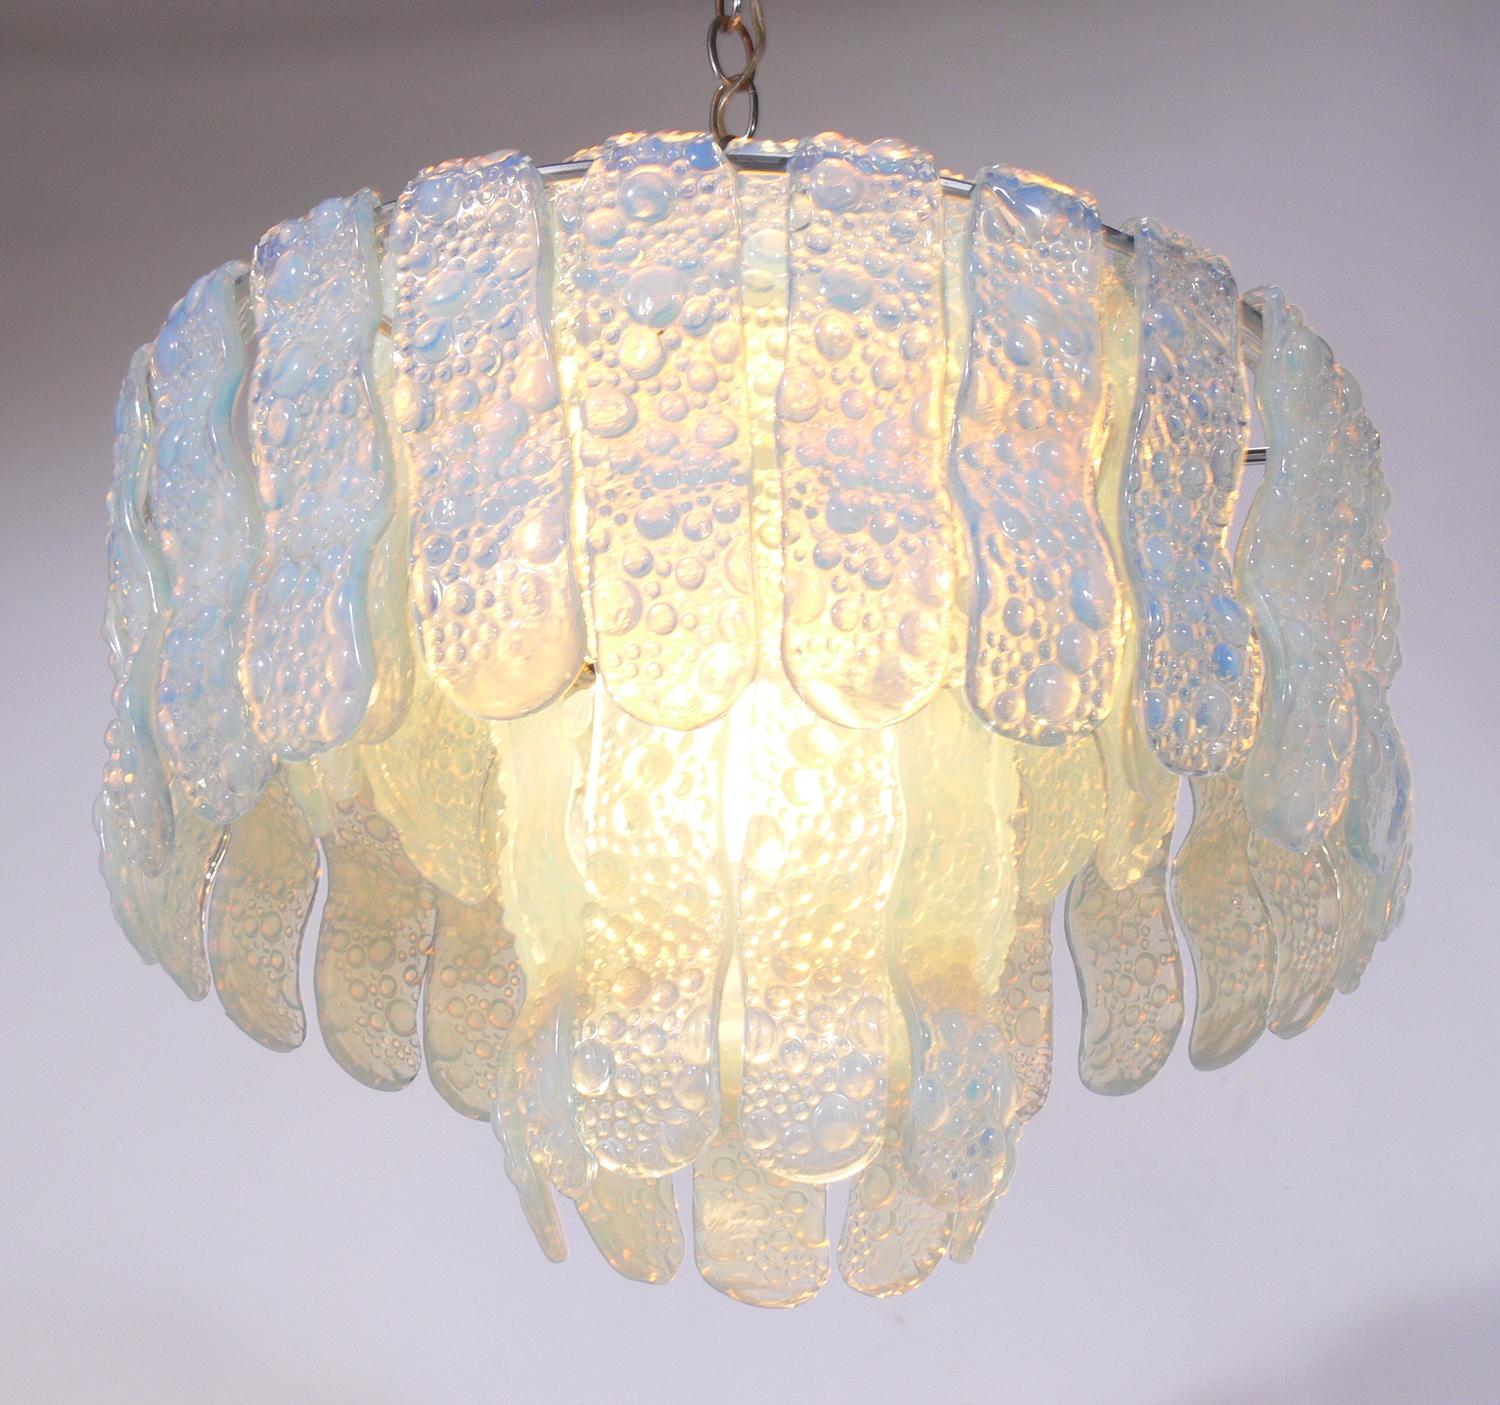 Italian opalescent blue glass chandelier, Italy, circa 1960s. Looks incredible when lit. Rewired and ready to mount.